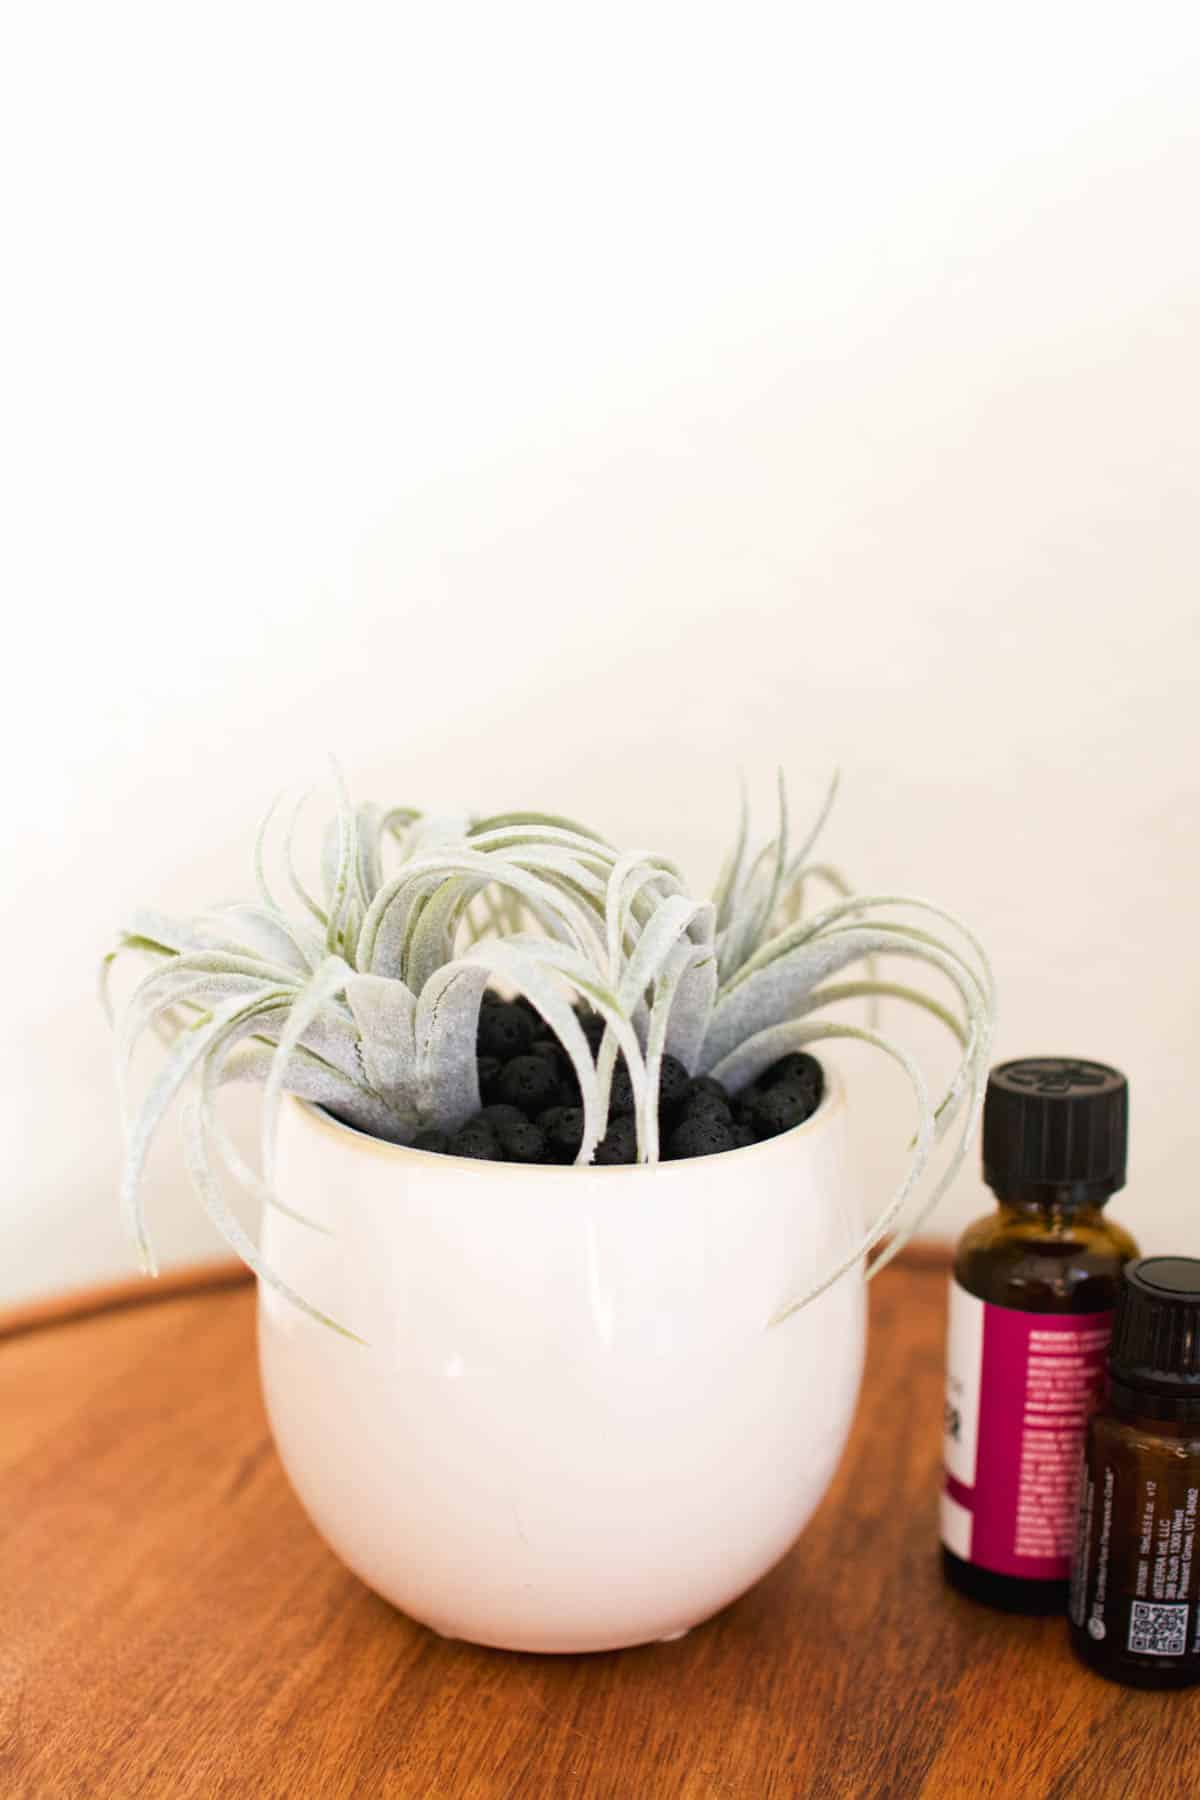 A homemade lava rock diffuser made from a succulent in a planter next to bottles of essential oils.